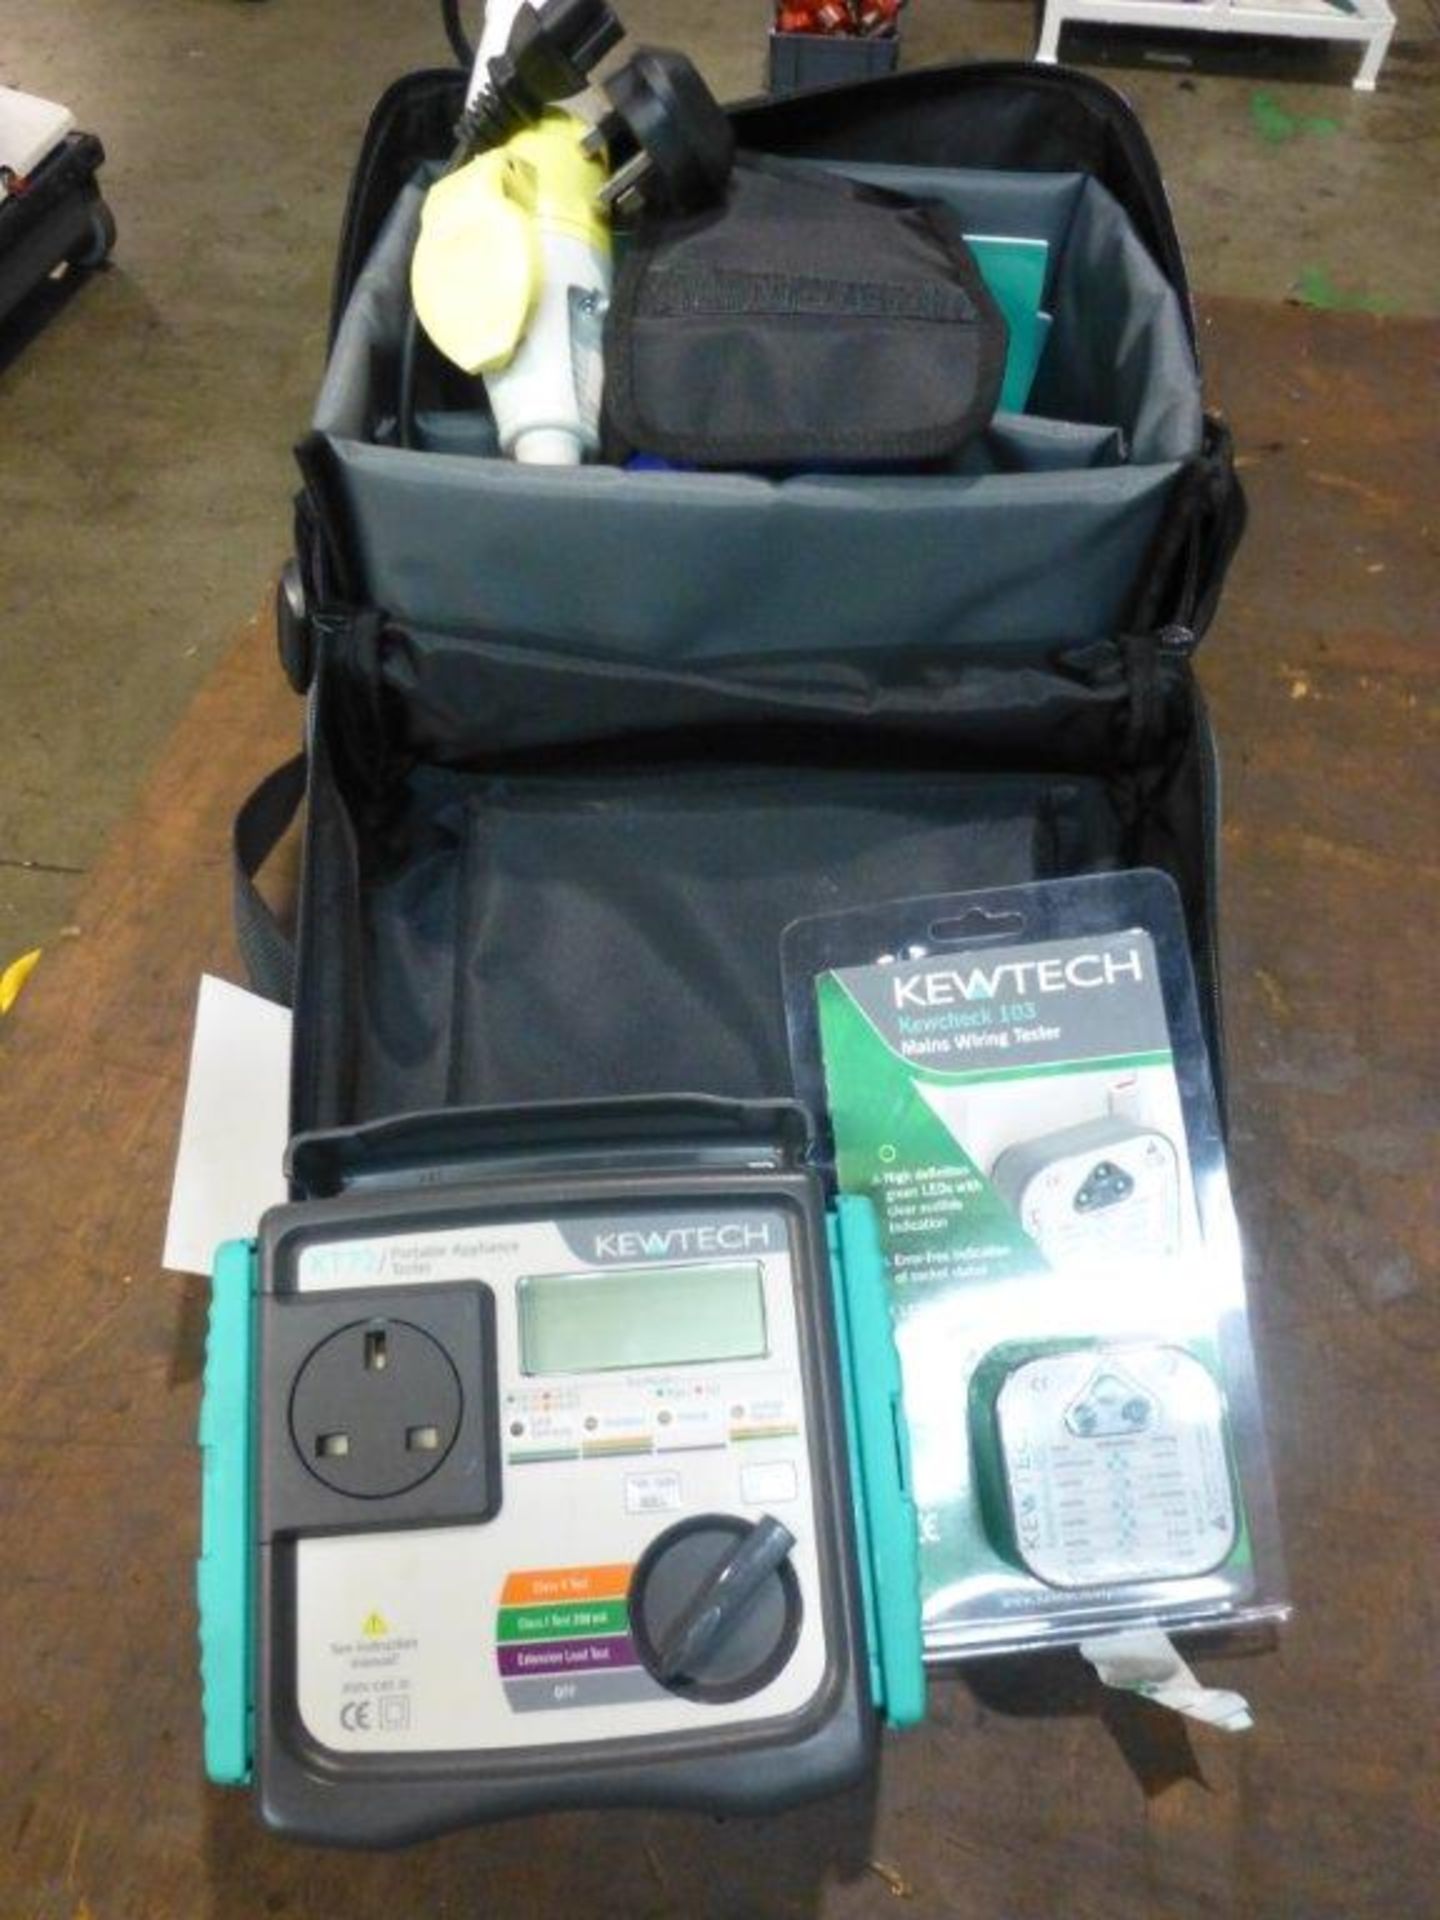 Kewtech KT72 portable appliance tester with leads and storage case - Image 2 of 2